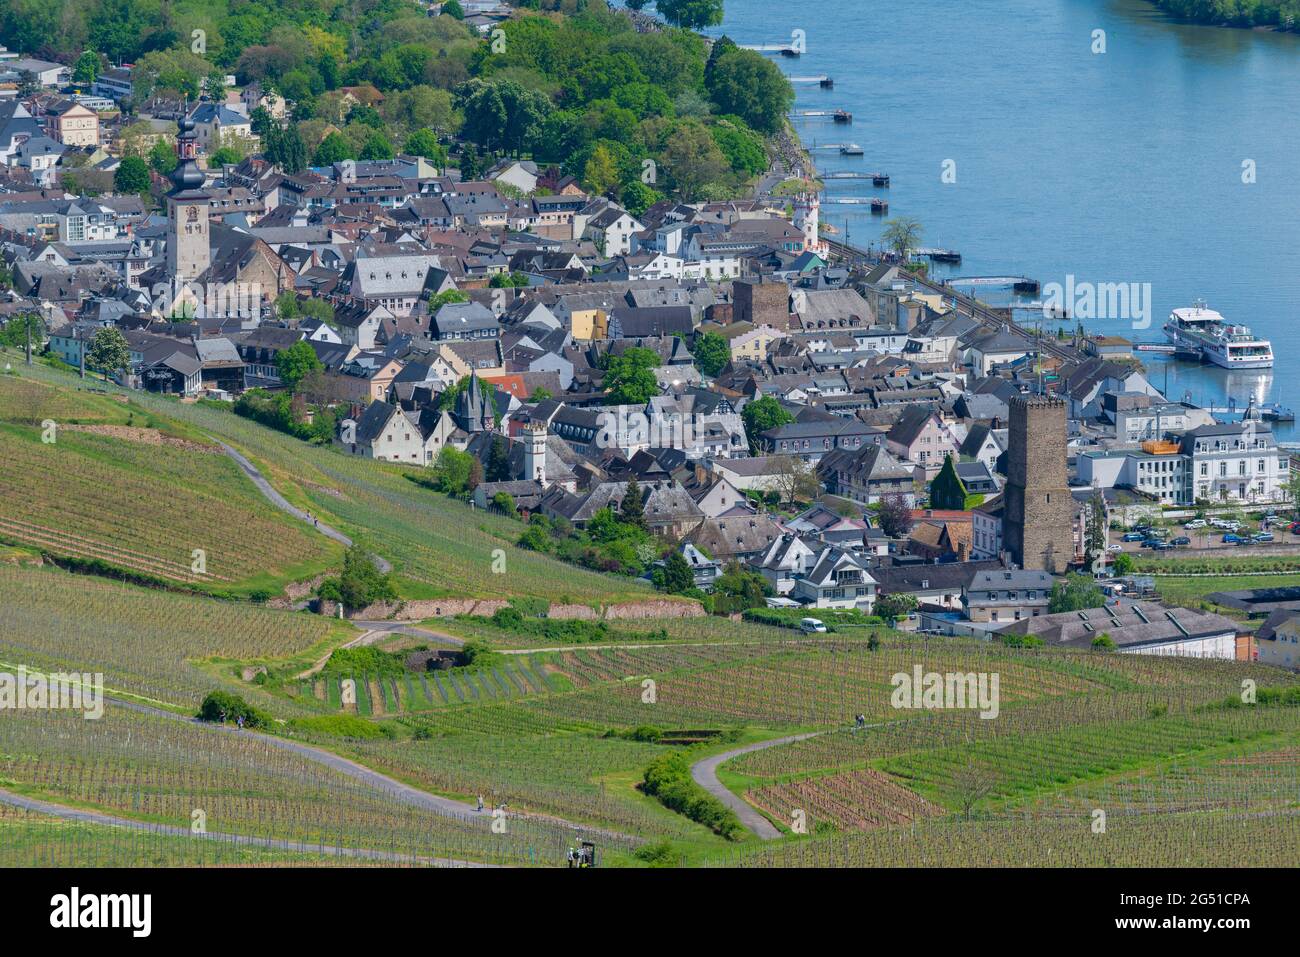 Town and vinyards seen from the Niederwald Memorial, Rüdesheim, famous wine village in Rheingau landscape on the Rhine River, Hesse, Germany, Europe Stock Photo